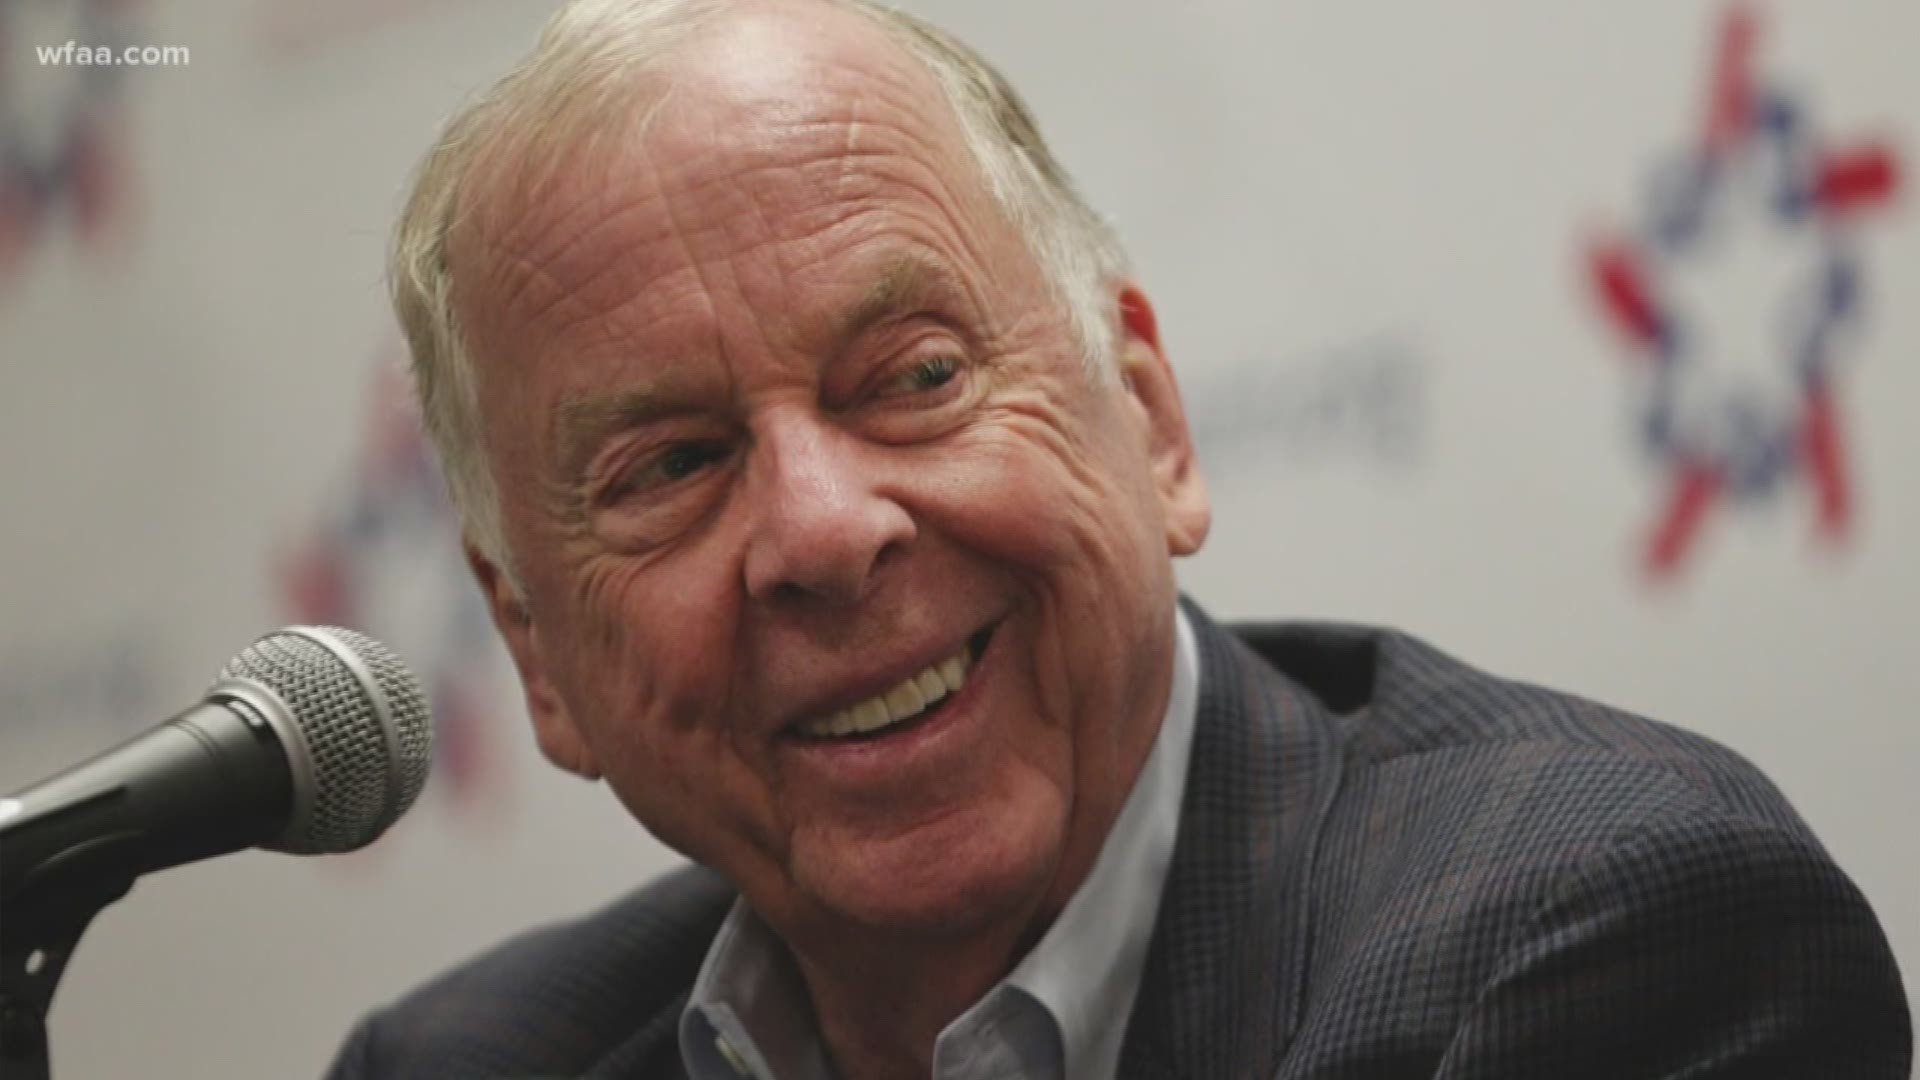 T. Boone Pickens, a self-made Texas oil tycoon, energy entrepreneur, and long-time resident of Dallas died Wednesday at age 91.

After a couple of strokes and a few falls, Pickens’ health deteriorated and he had been receiving hospice care at home since last Thursday, according to spokesman Jay Rosser.

He died at home Wednesday afternoon with his family by his side, Rosser said.